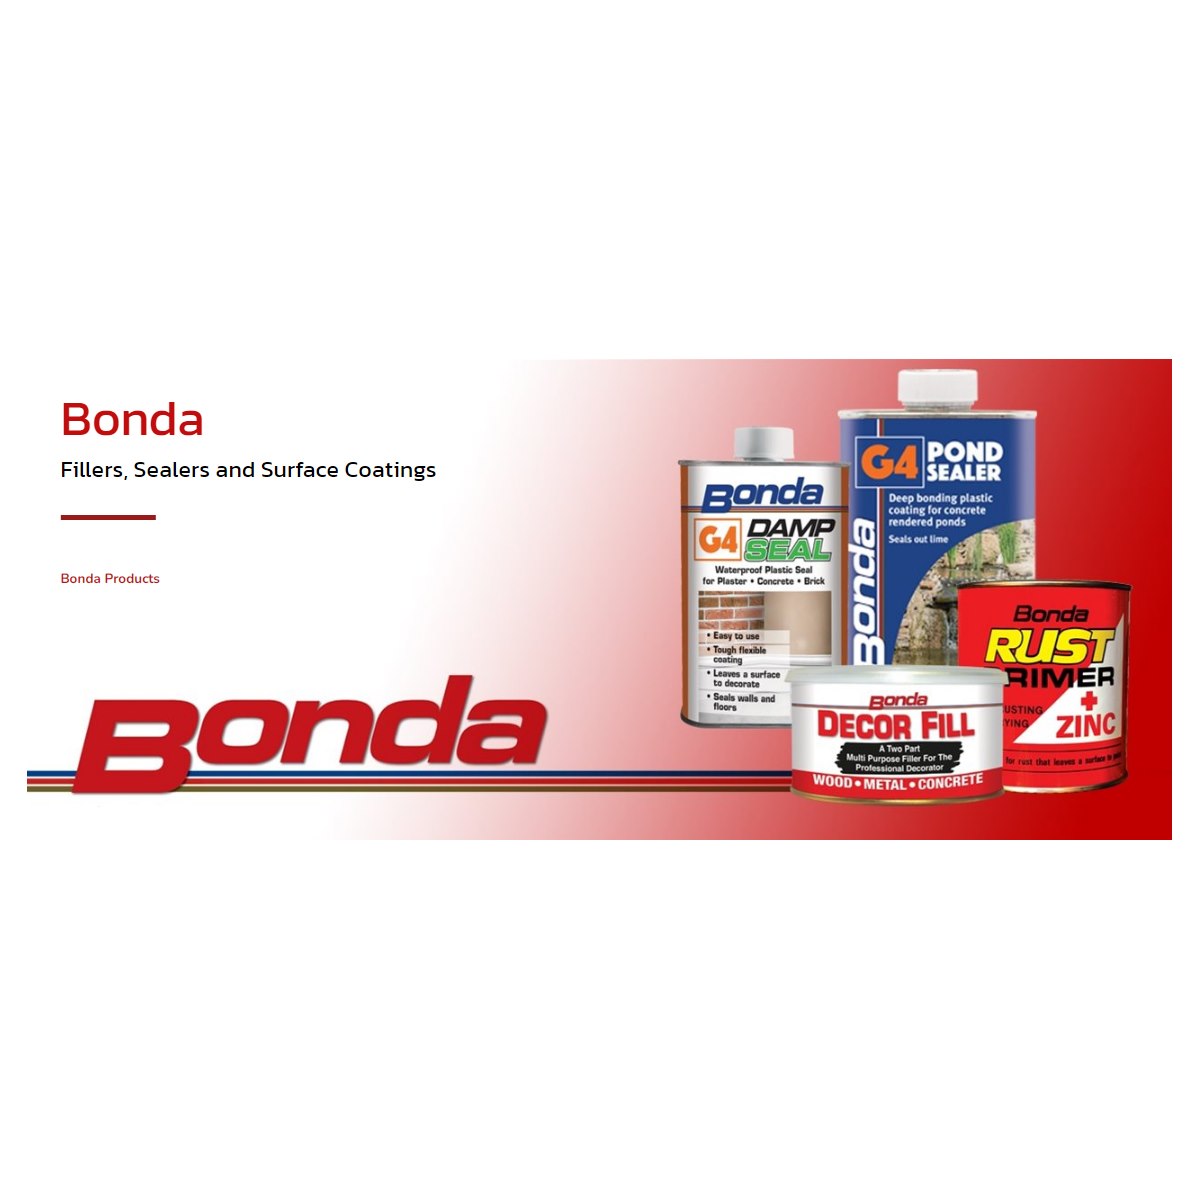 Where-to-Buy-Bonda-Products-Online